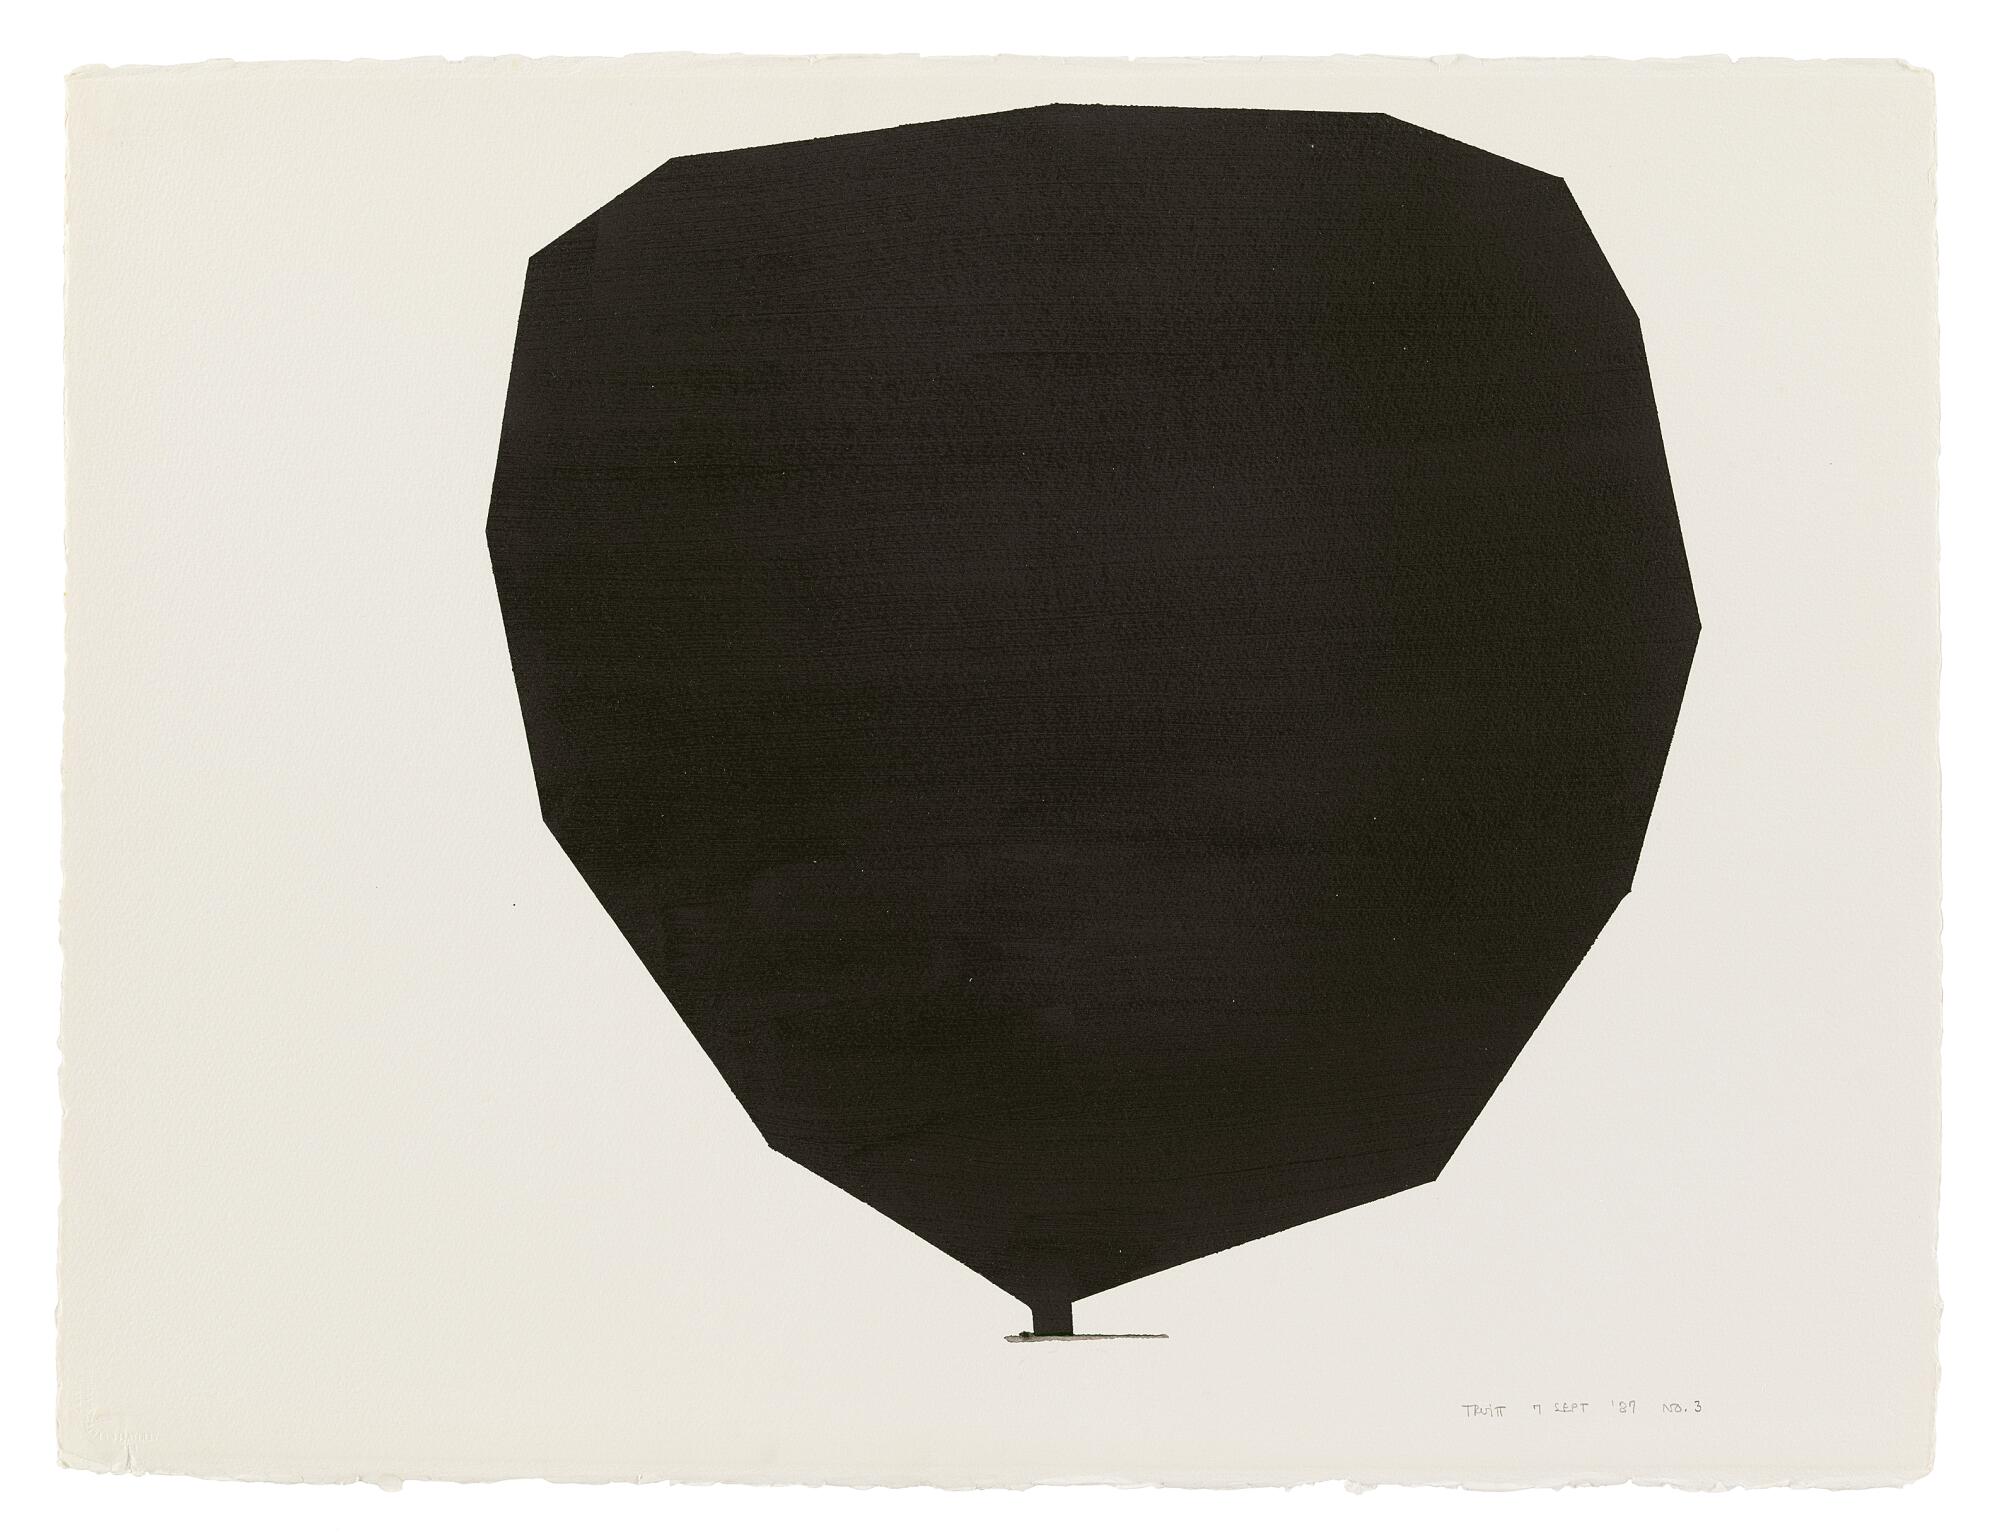 A minimalist work by Anne Truitt shows an irregularly shaped geometric form in black against a white background